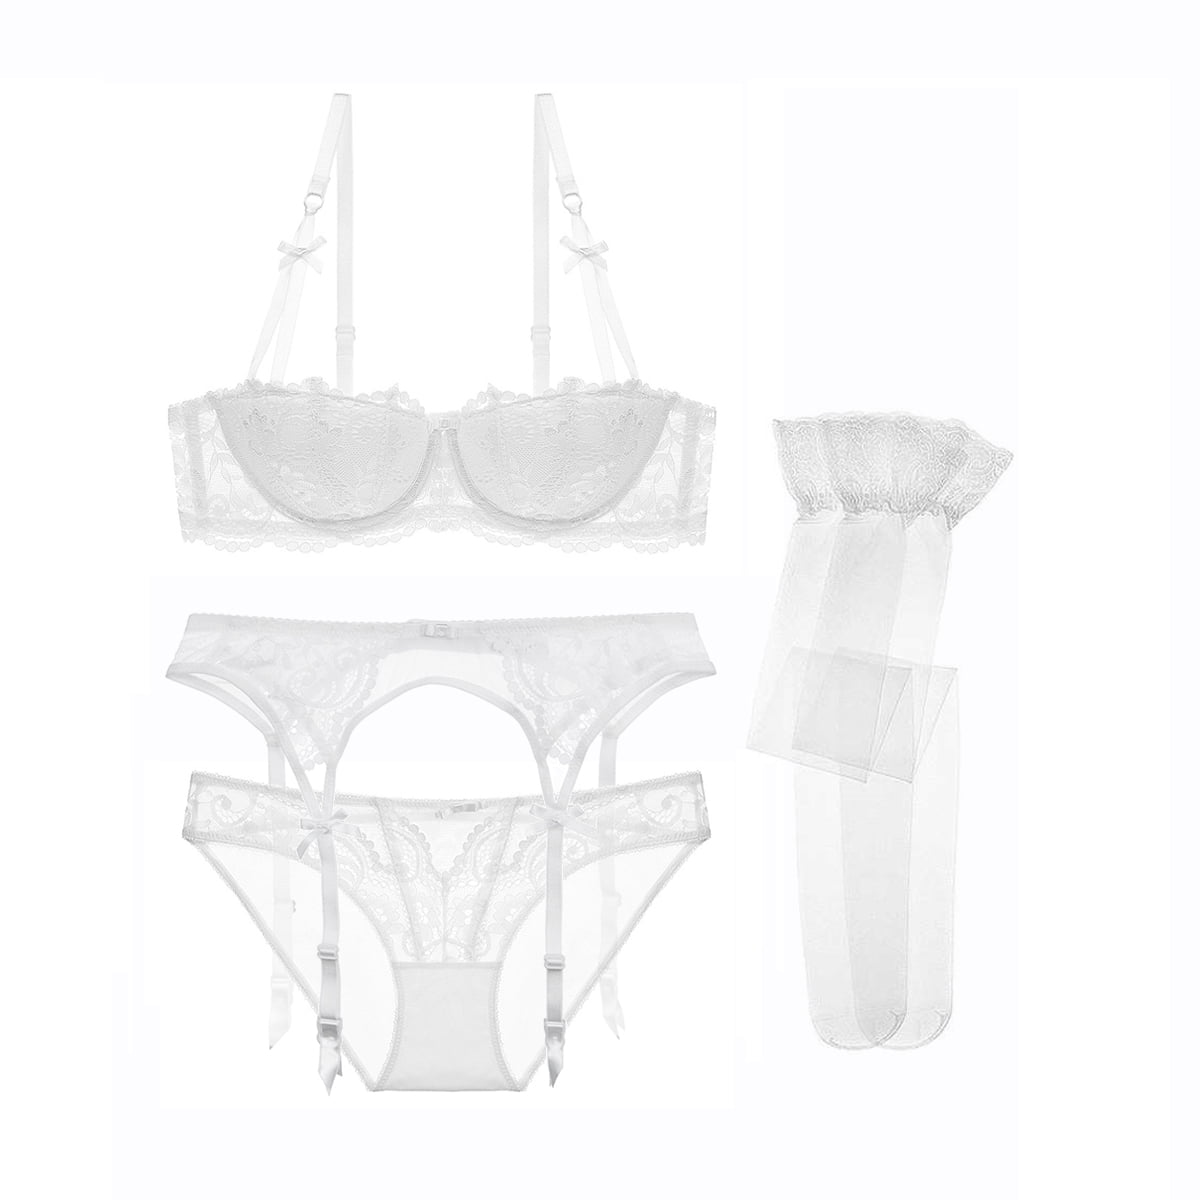 Varsbaby Lace Push Up Bra Set Back With Panties, Garter Stockings, And  Necklace Christmas Collection From Geymf, $38.18